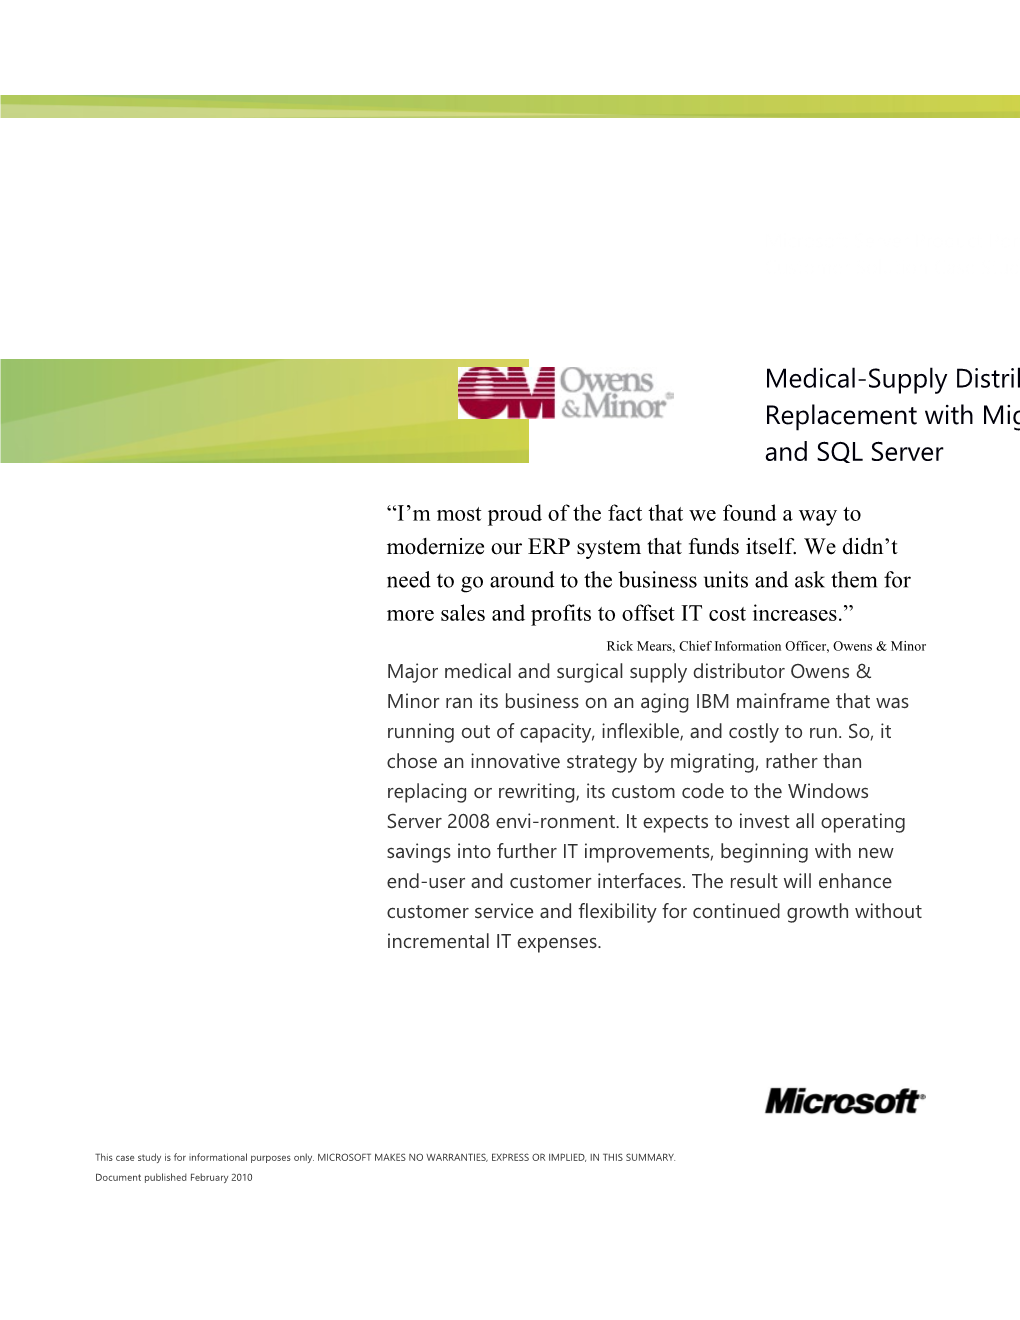 Medical-Supply Distributor Avoids Costly ERP Replacement with Migration to Windows Server